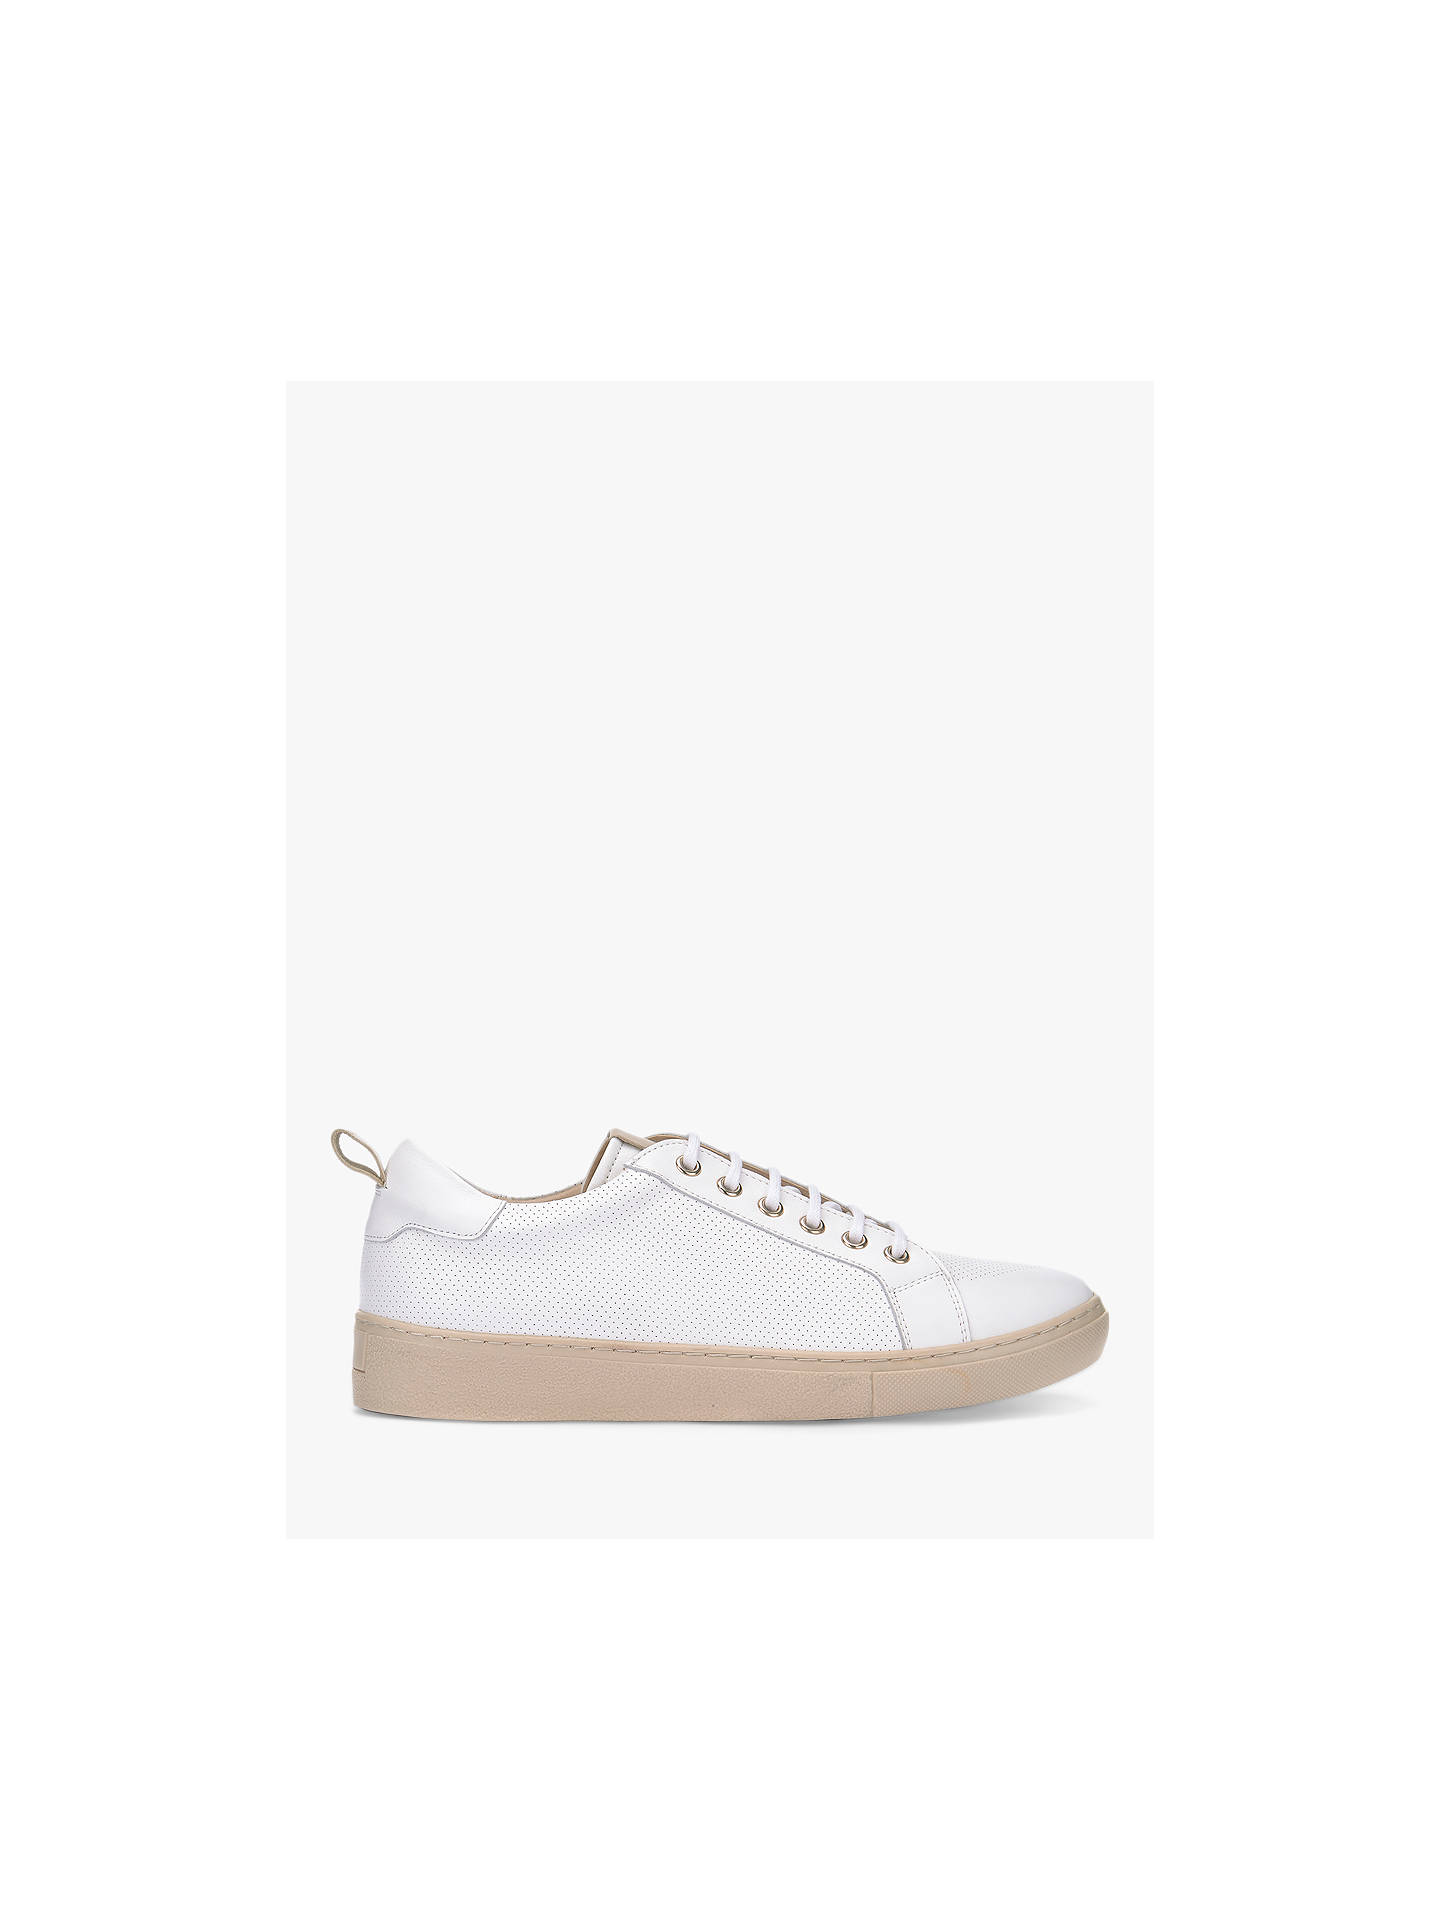 Mint Velvet Eve Perforated Trainers, White at John Lewis & Partners